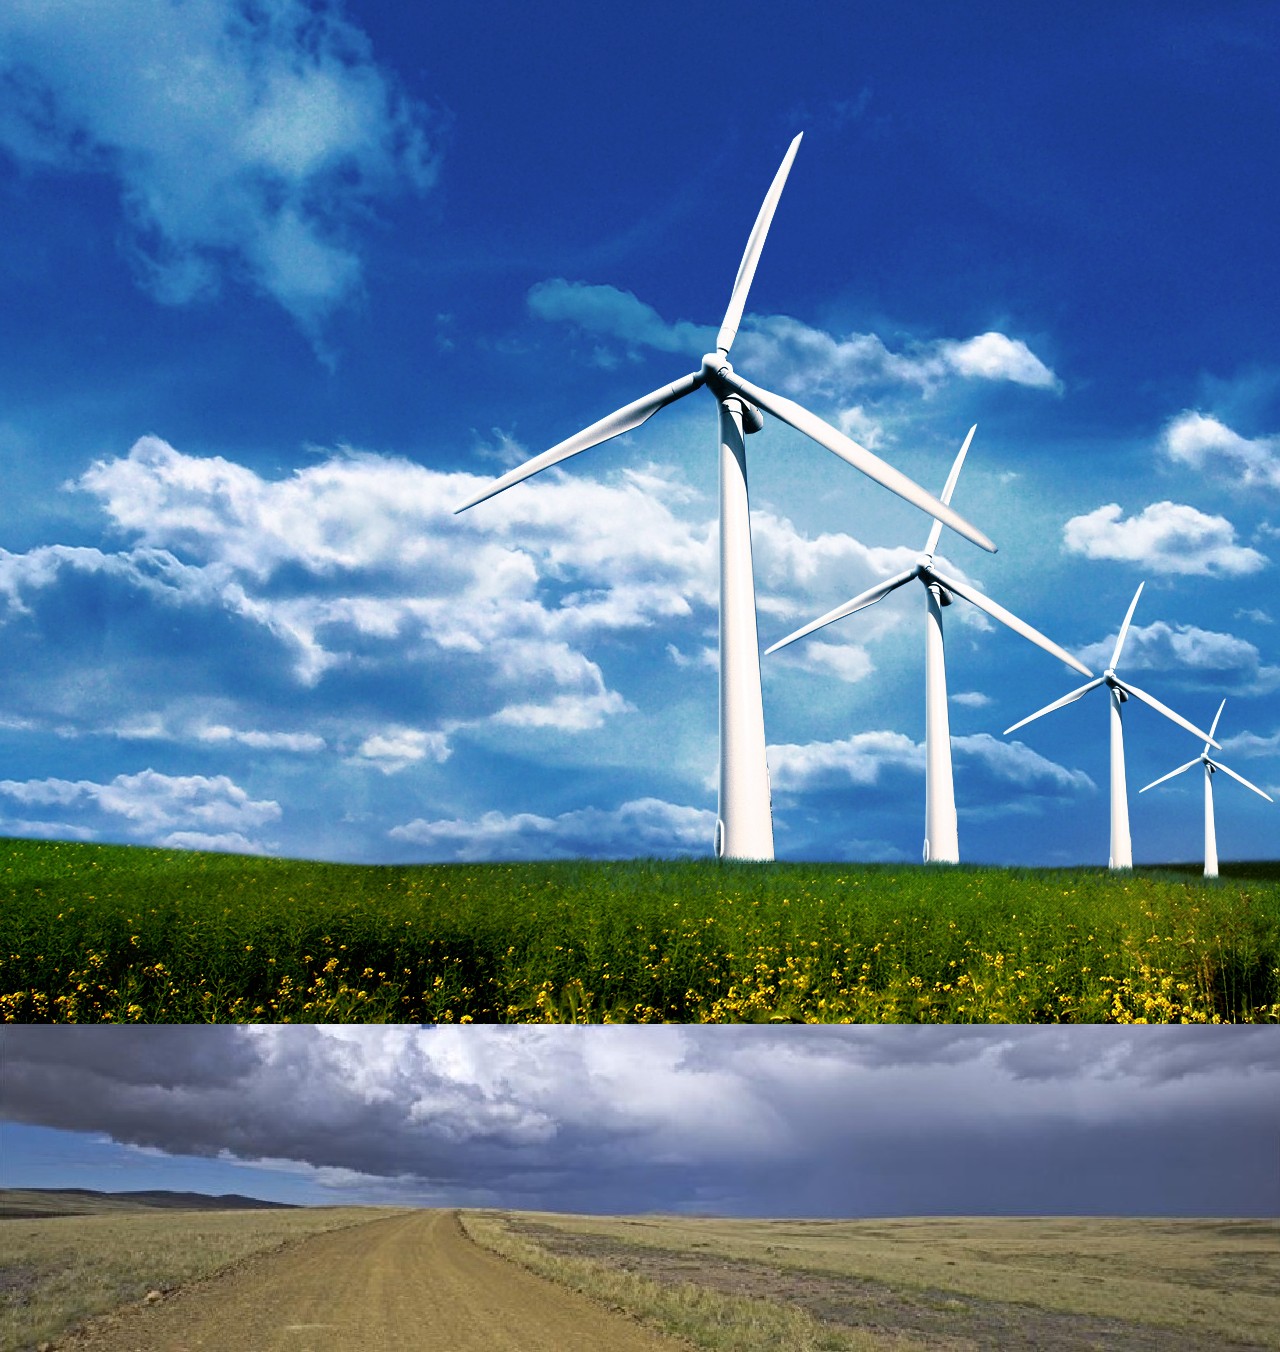 Wind turbines or the Falkland Islands: Which ones do you want to keep?